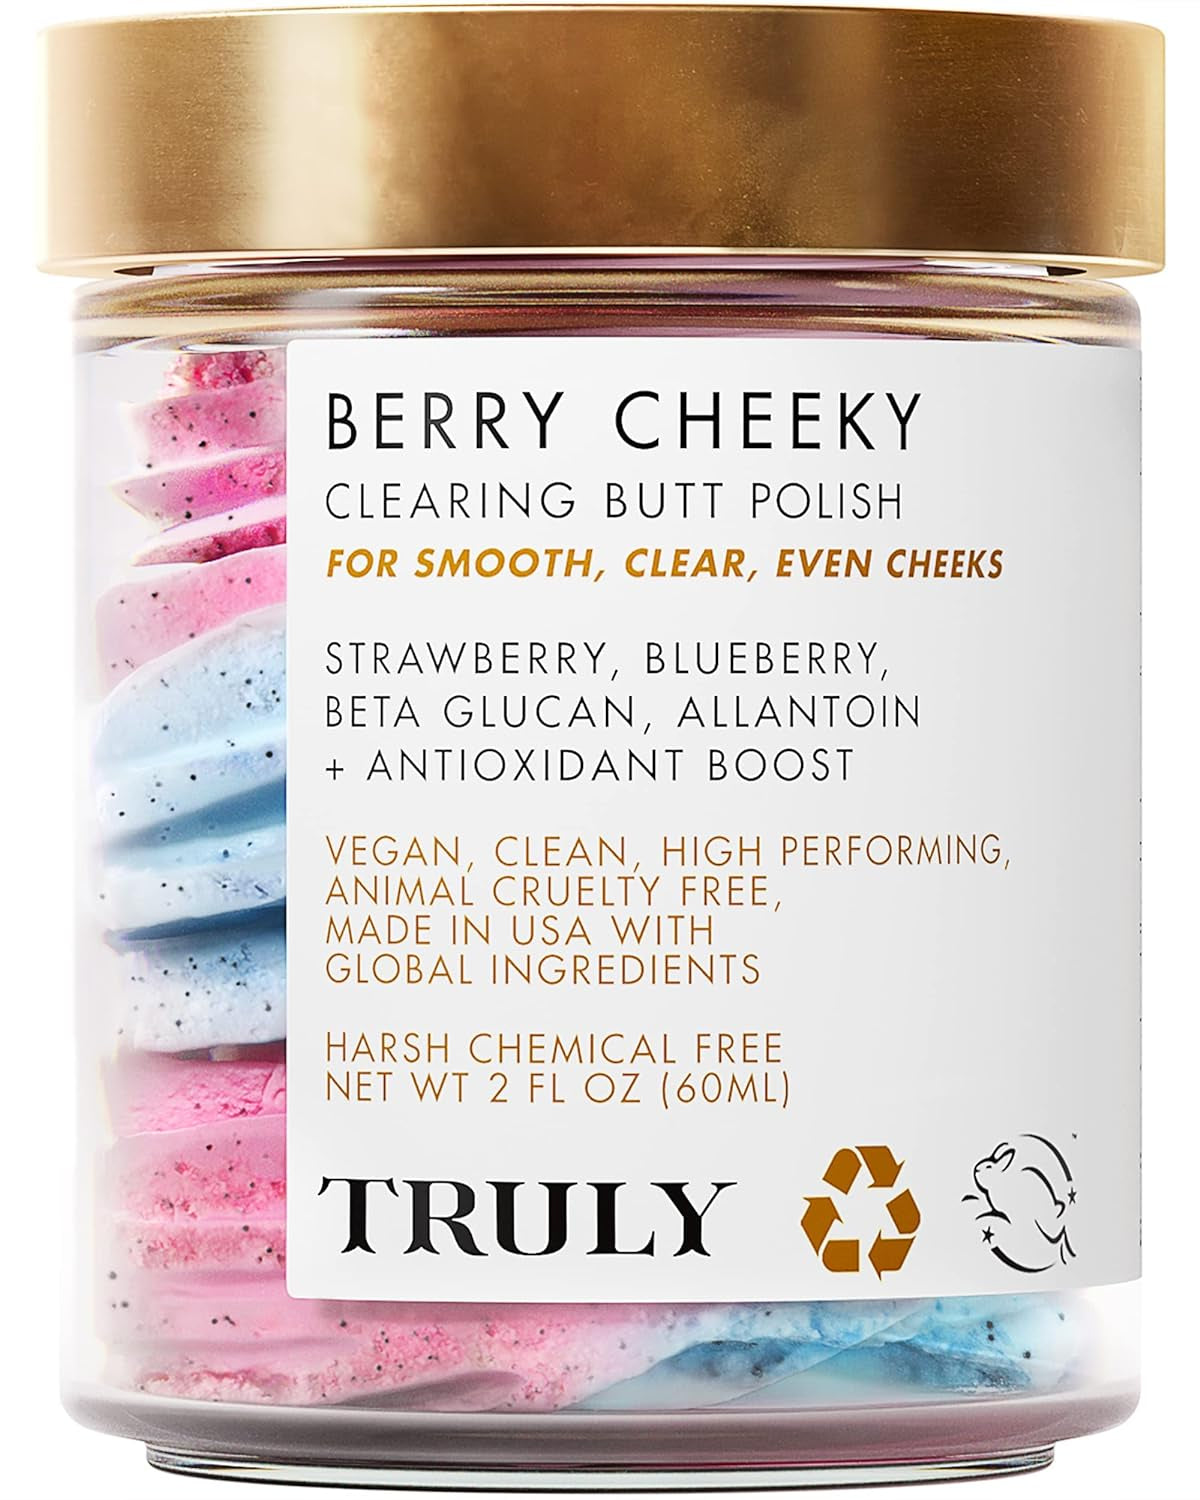 Professional Product Title: "Truly Beauty Clearing Butt Polish - Gentle Acne Body Scrub for Bacne and Acne - Exfoliating Body Wash and Bum Acne Treatment - Butt Acne Clearing and Scrub - 2 OZ"